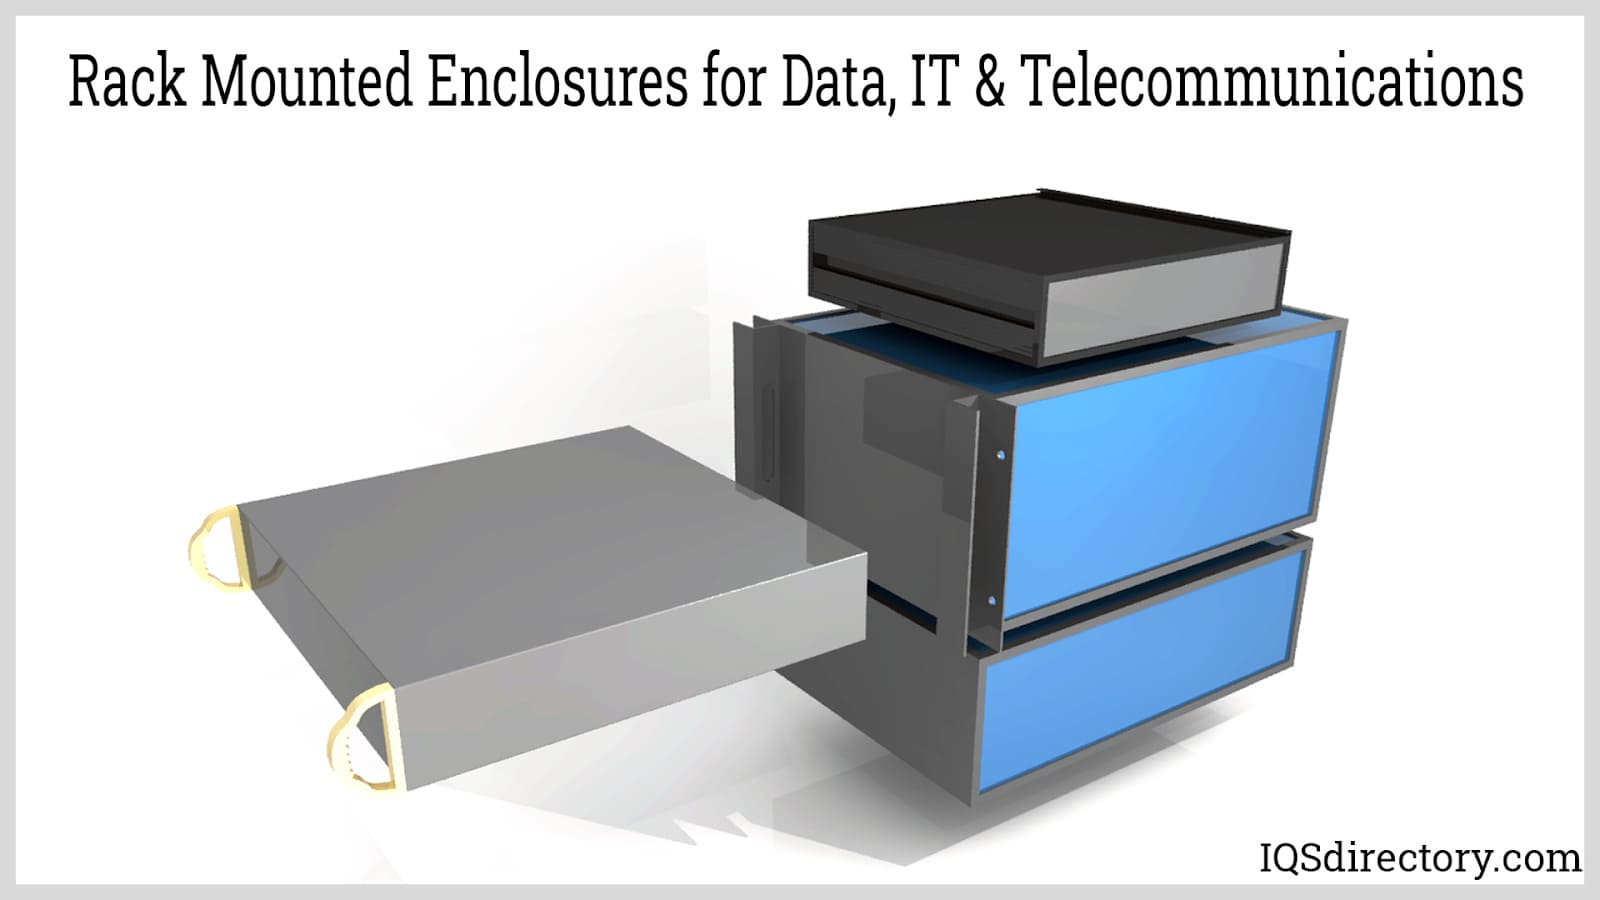 Rack Mounted Enclosures for Data, IT & Telecommunications